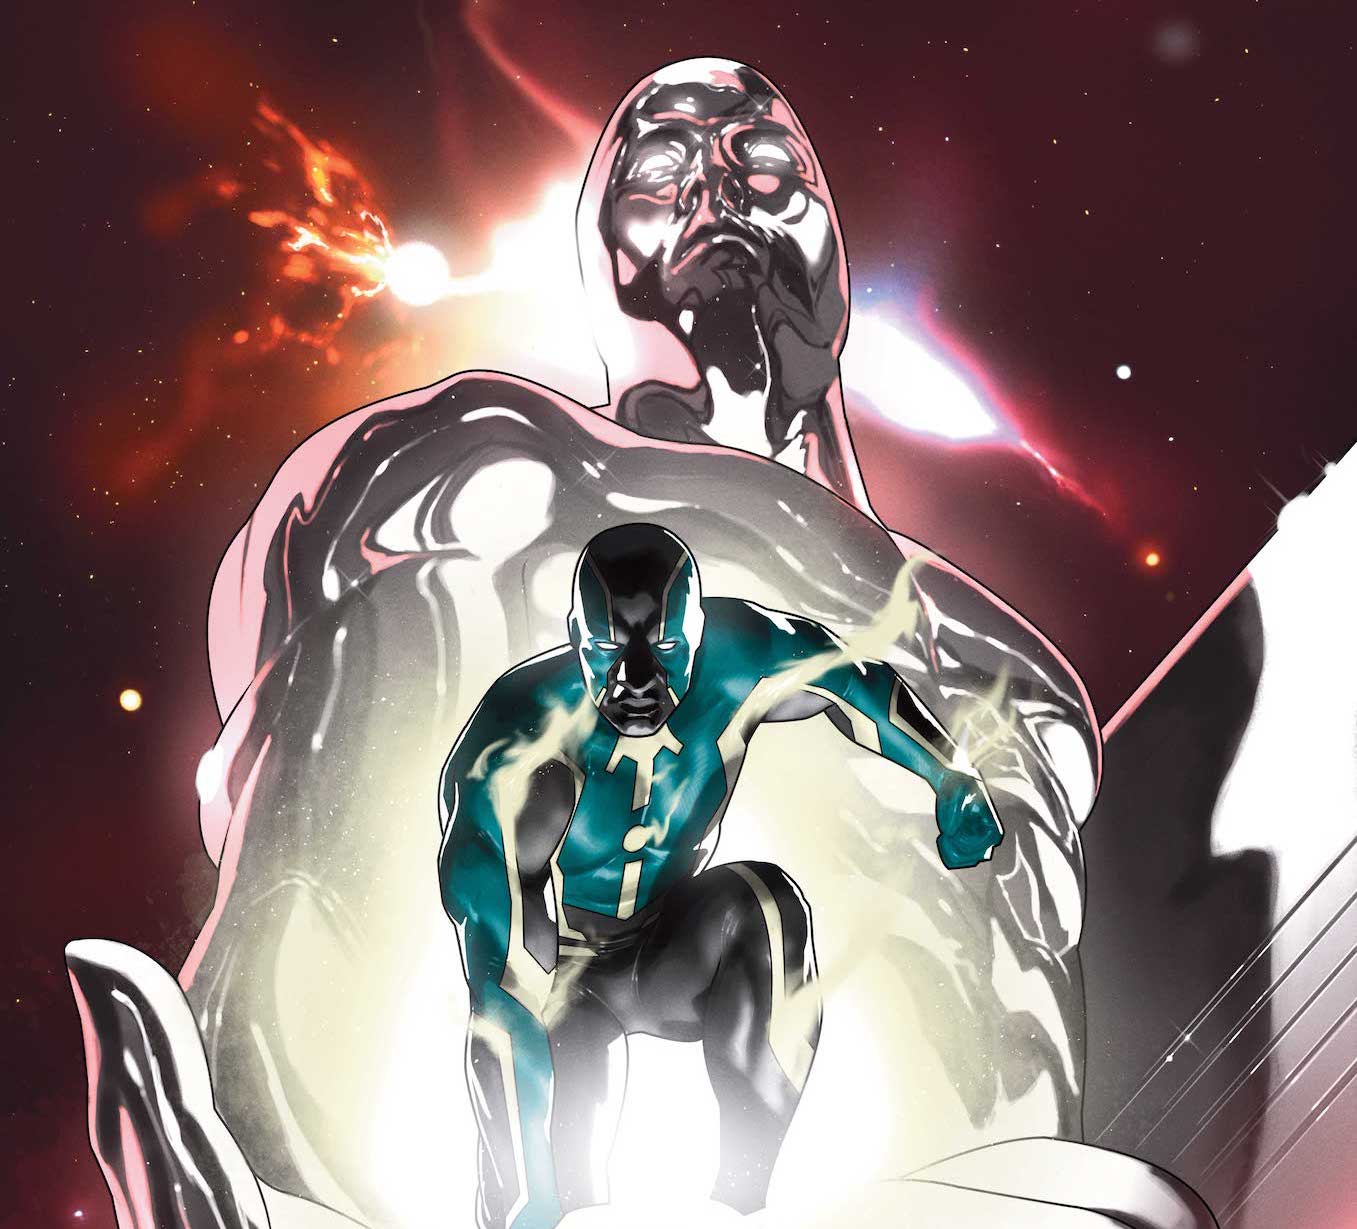 'Silver Surfer: Ghost Light' announced for February 2023 at NYCC